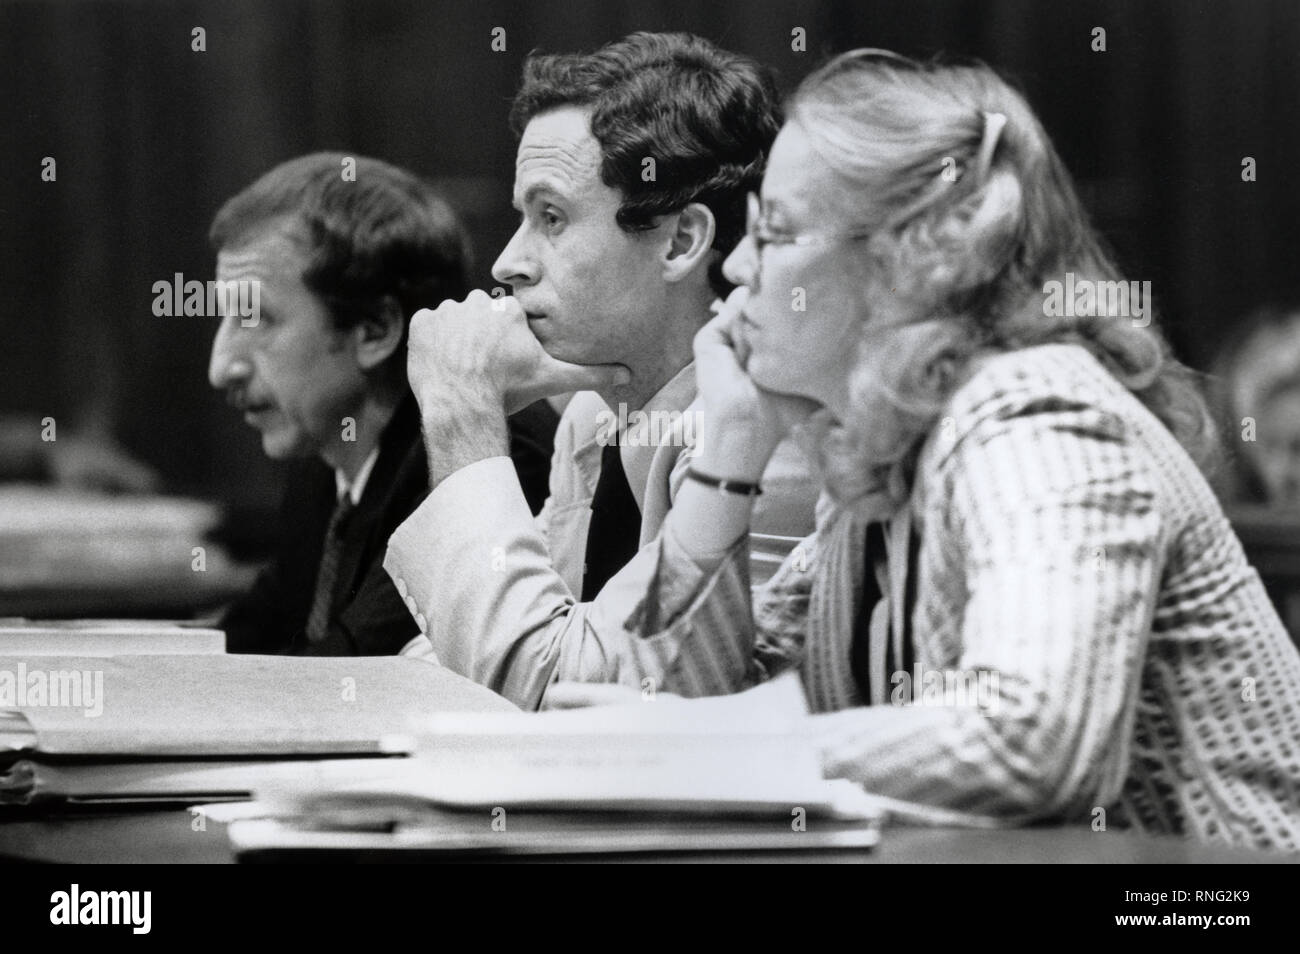 Ted Bundy Murder Trial - Miami - Ted Bundy with defense attorney Margaret  Good (right) and Public Defender Michael Minerva (left) at the defense  table. Theodore Robert Bundy was an American serial